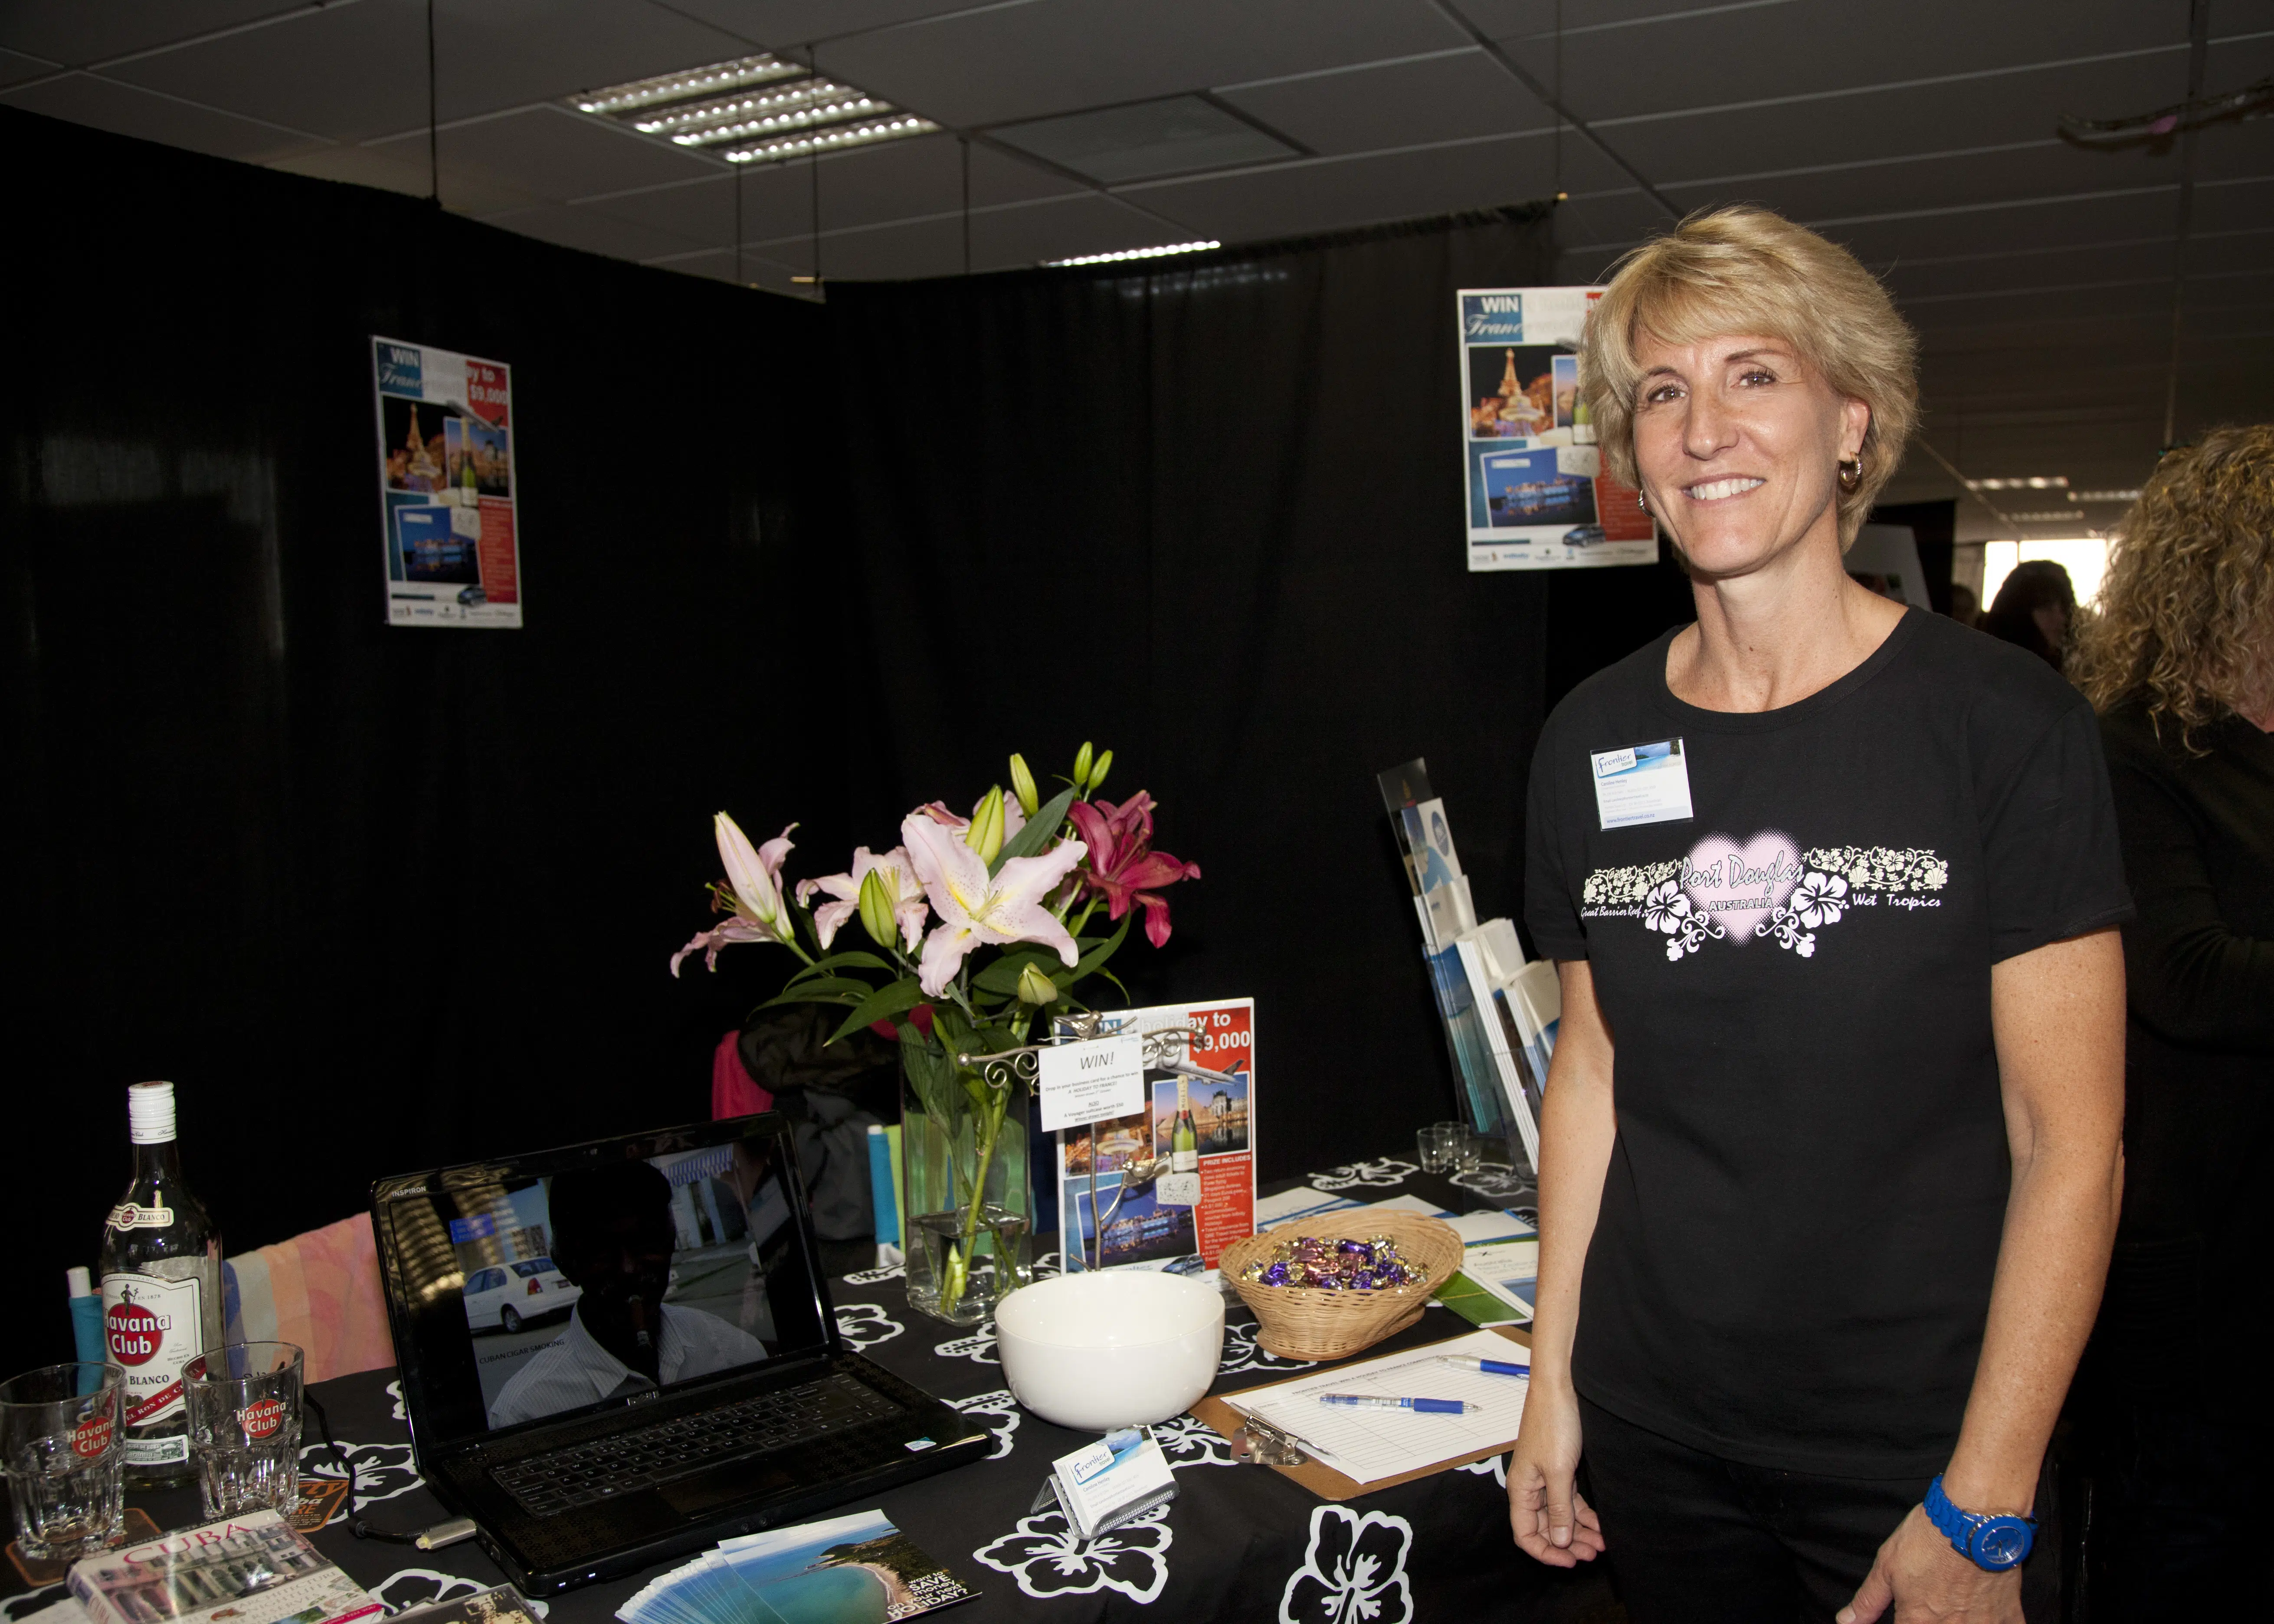 Frontier Travel at the Venus Network expo, Takapuna, Auckland